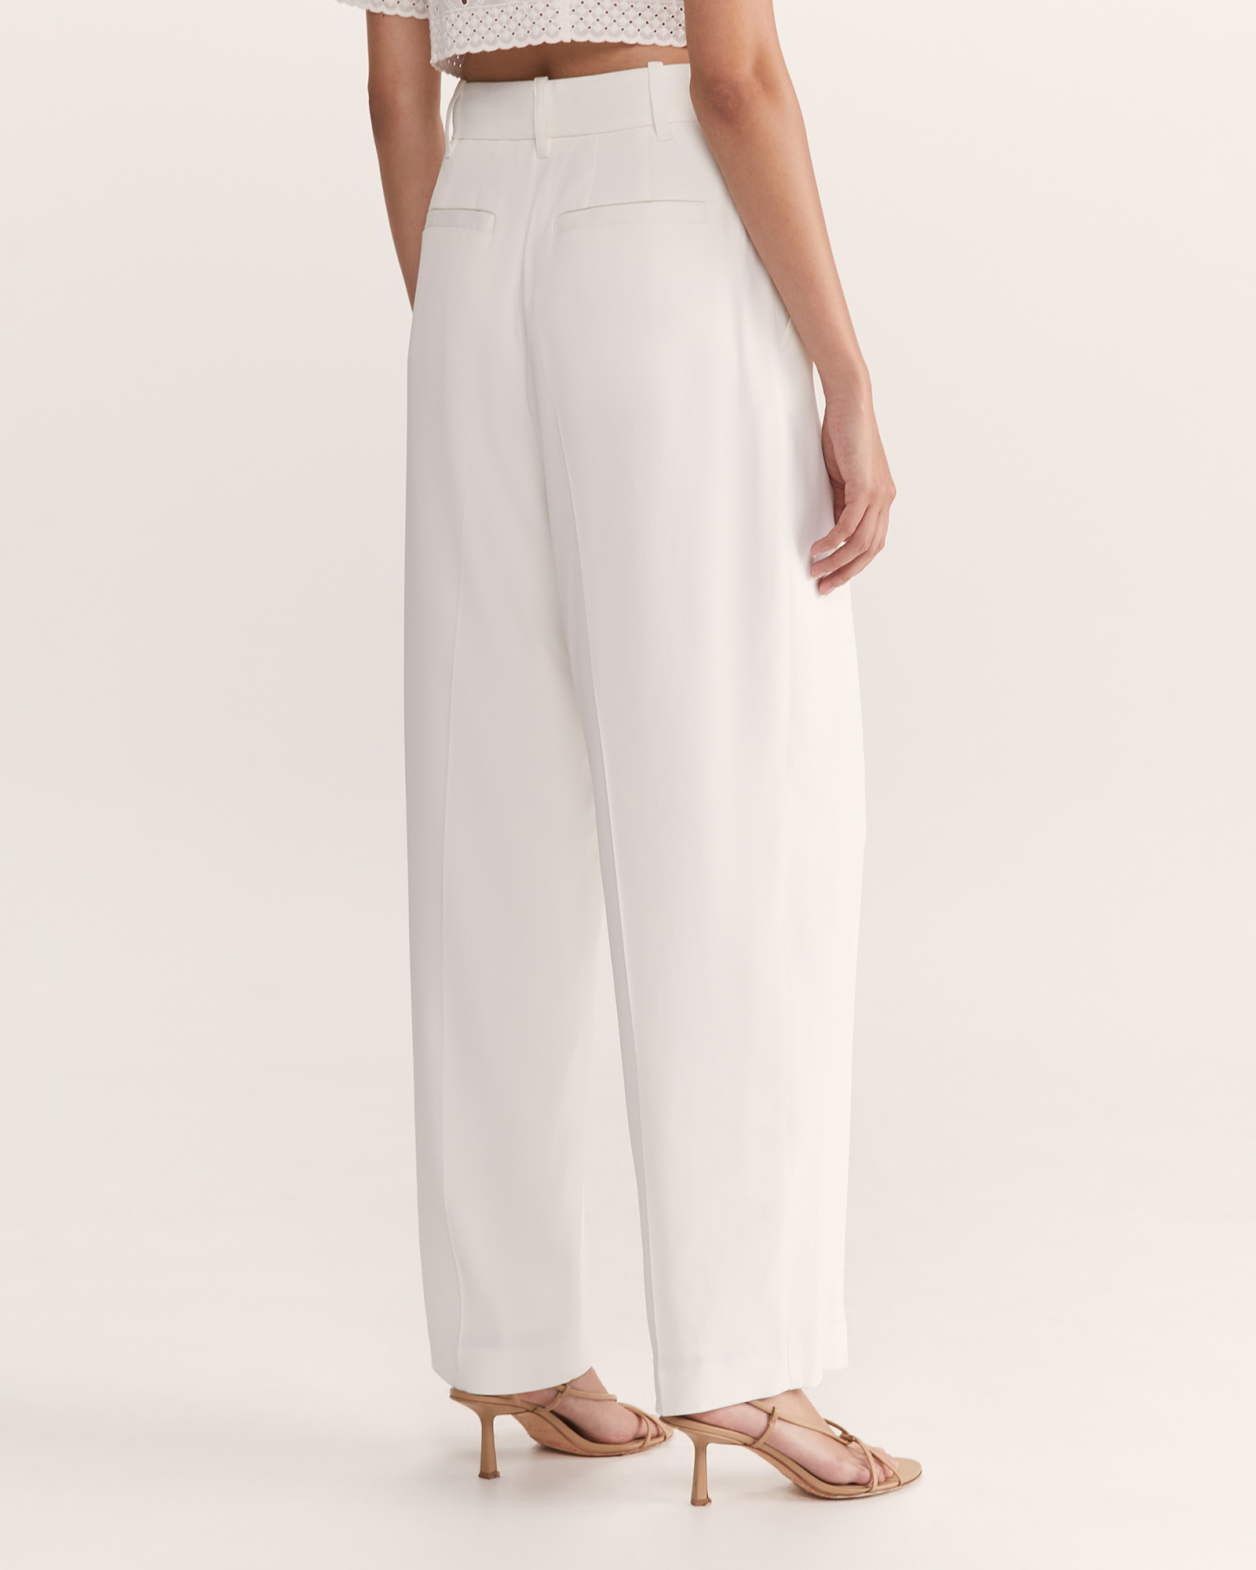 Asha Pleat Front Pant in CREME